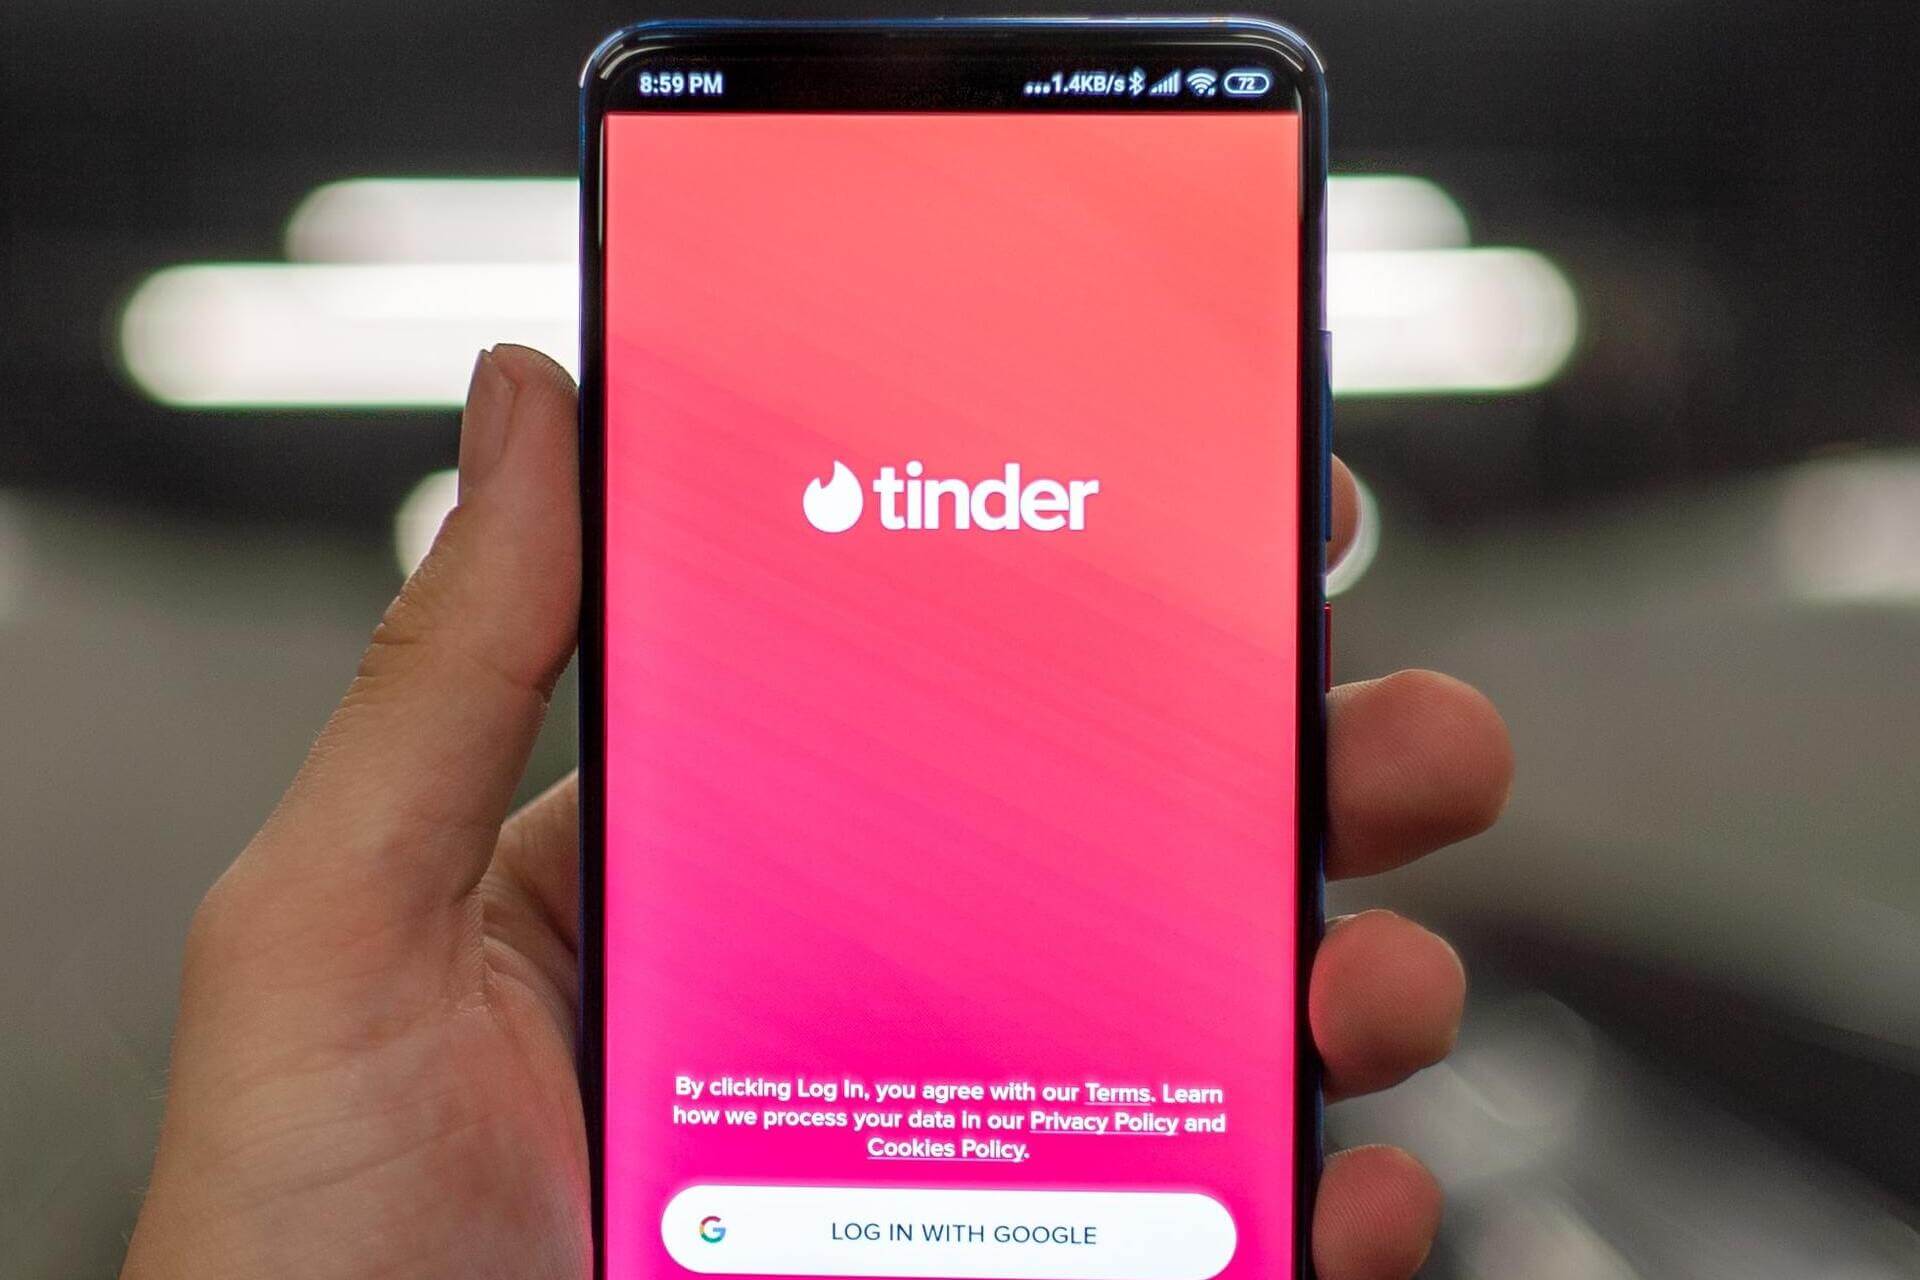 FIX: Tinder there was an error updating your profile